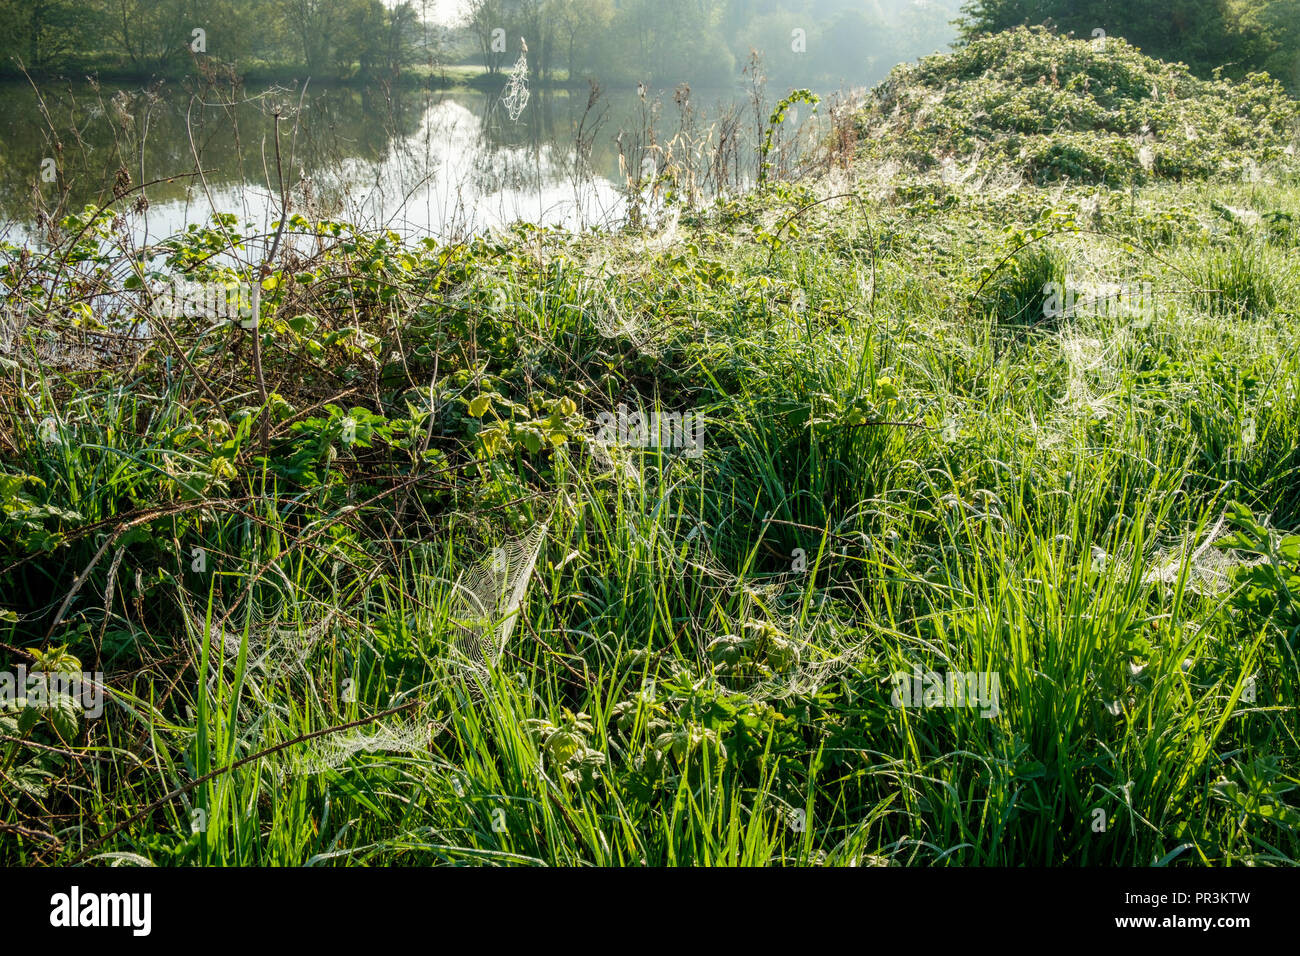 Early morning dew on spider's webs (cobwebs) and long grass by the River Trent, Nottinghamshire, England, UK Stock Photo